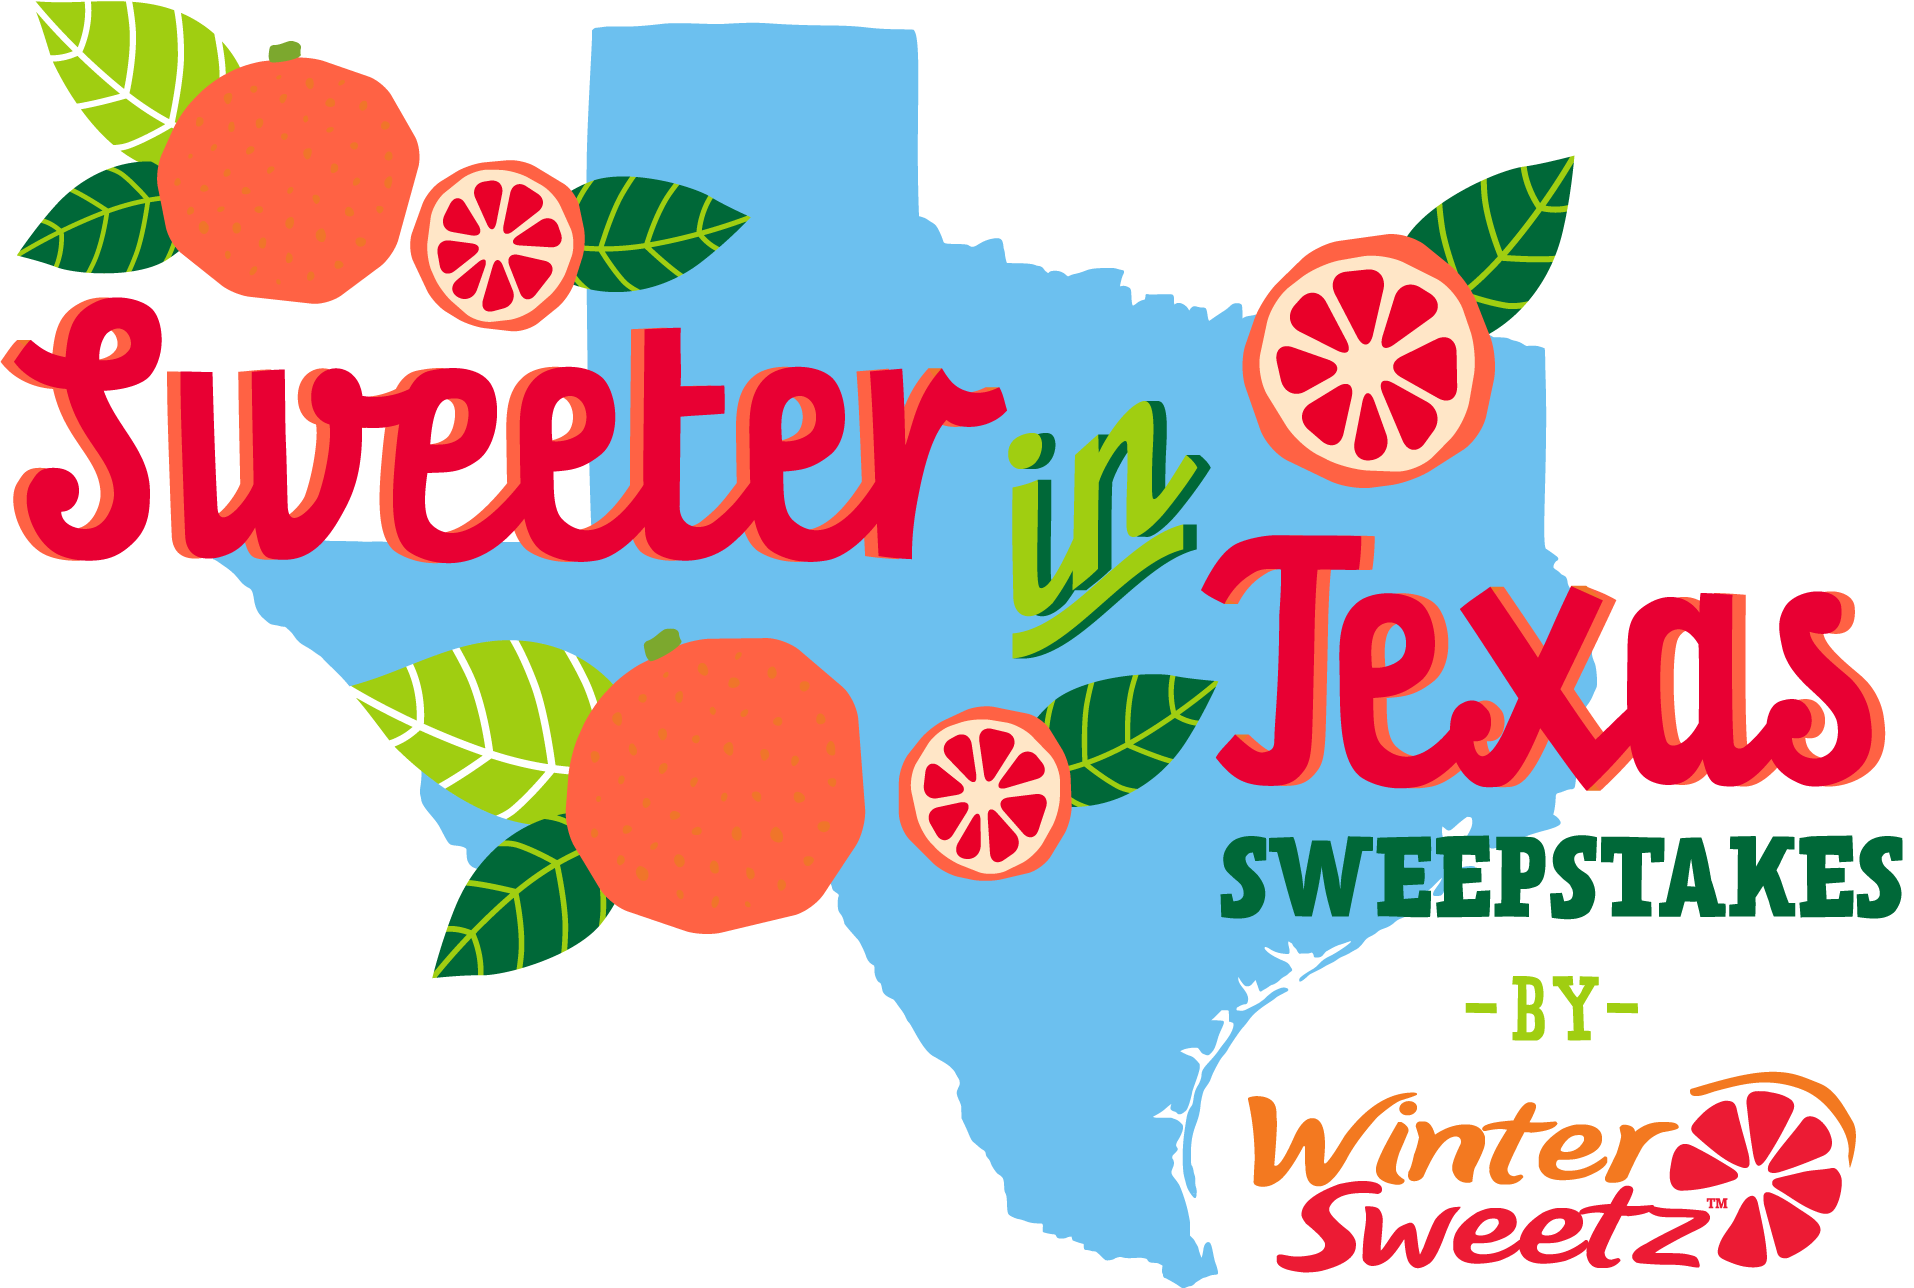 logo for Sweeter in Texas Sweepstakes by Winter Sweetz